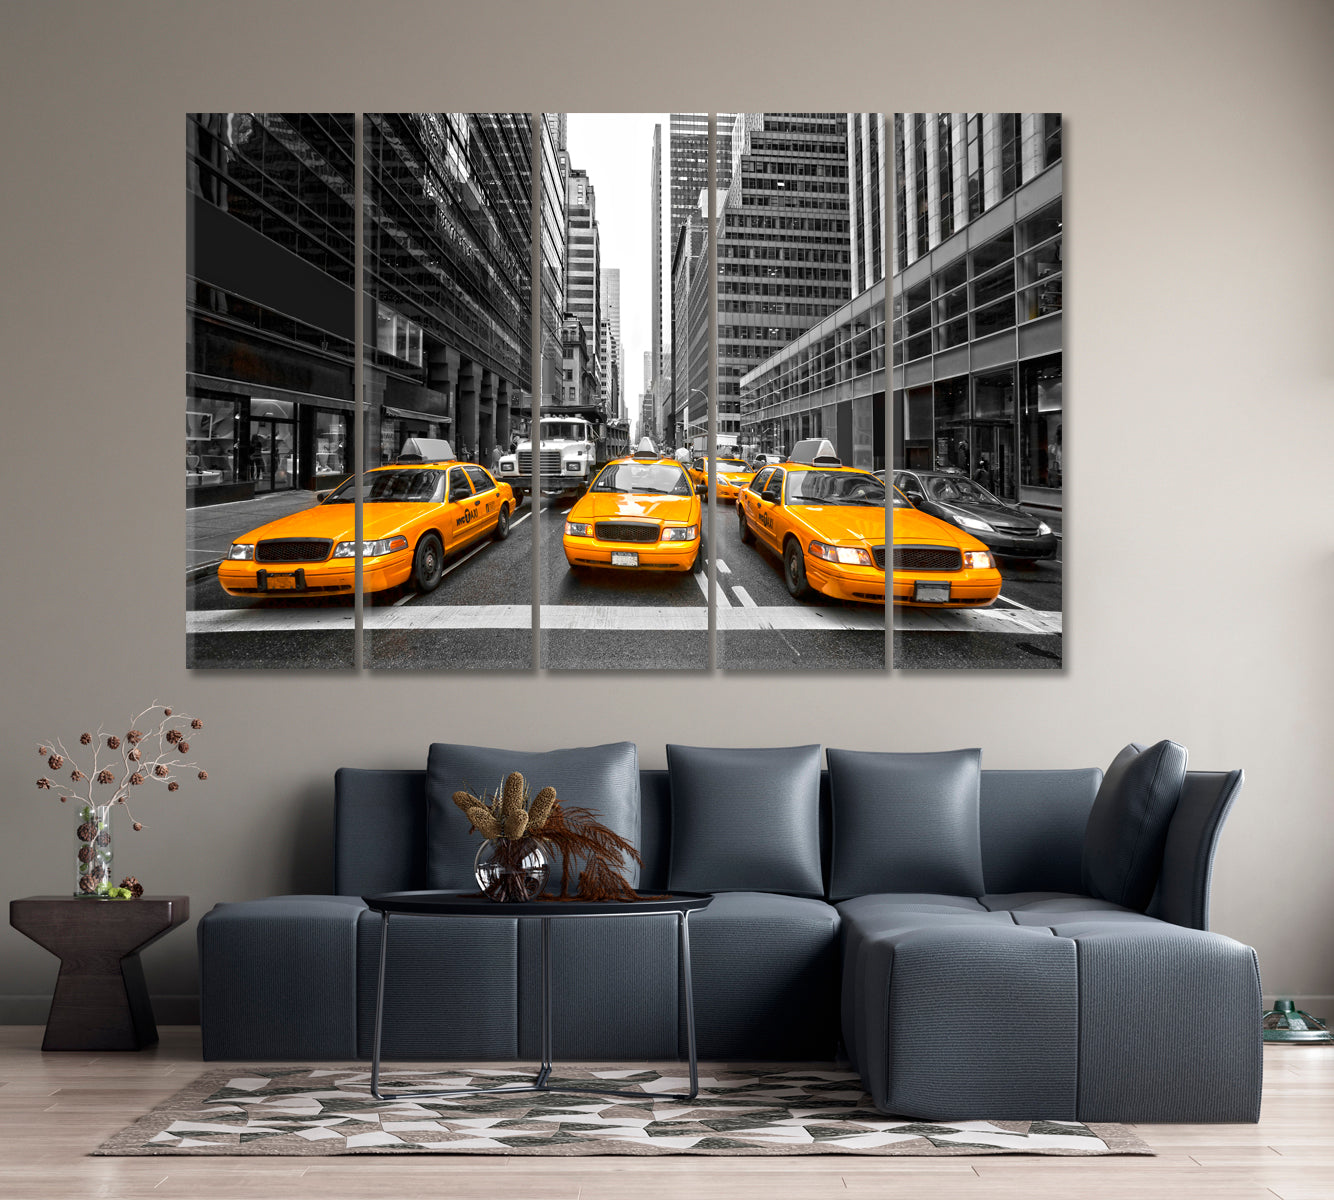 YELLOW TAXI 5th Avenue New York City Cities Wall Art Artesty 5 panels 36" x 24" 